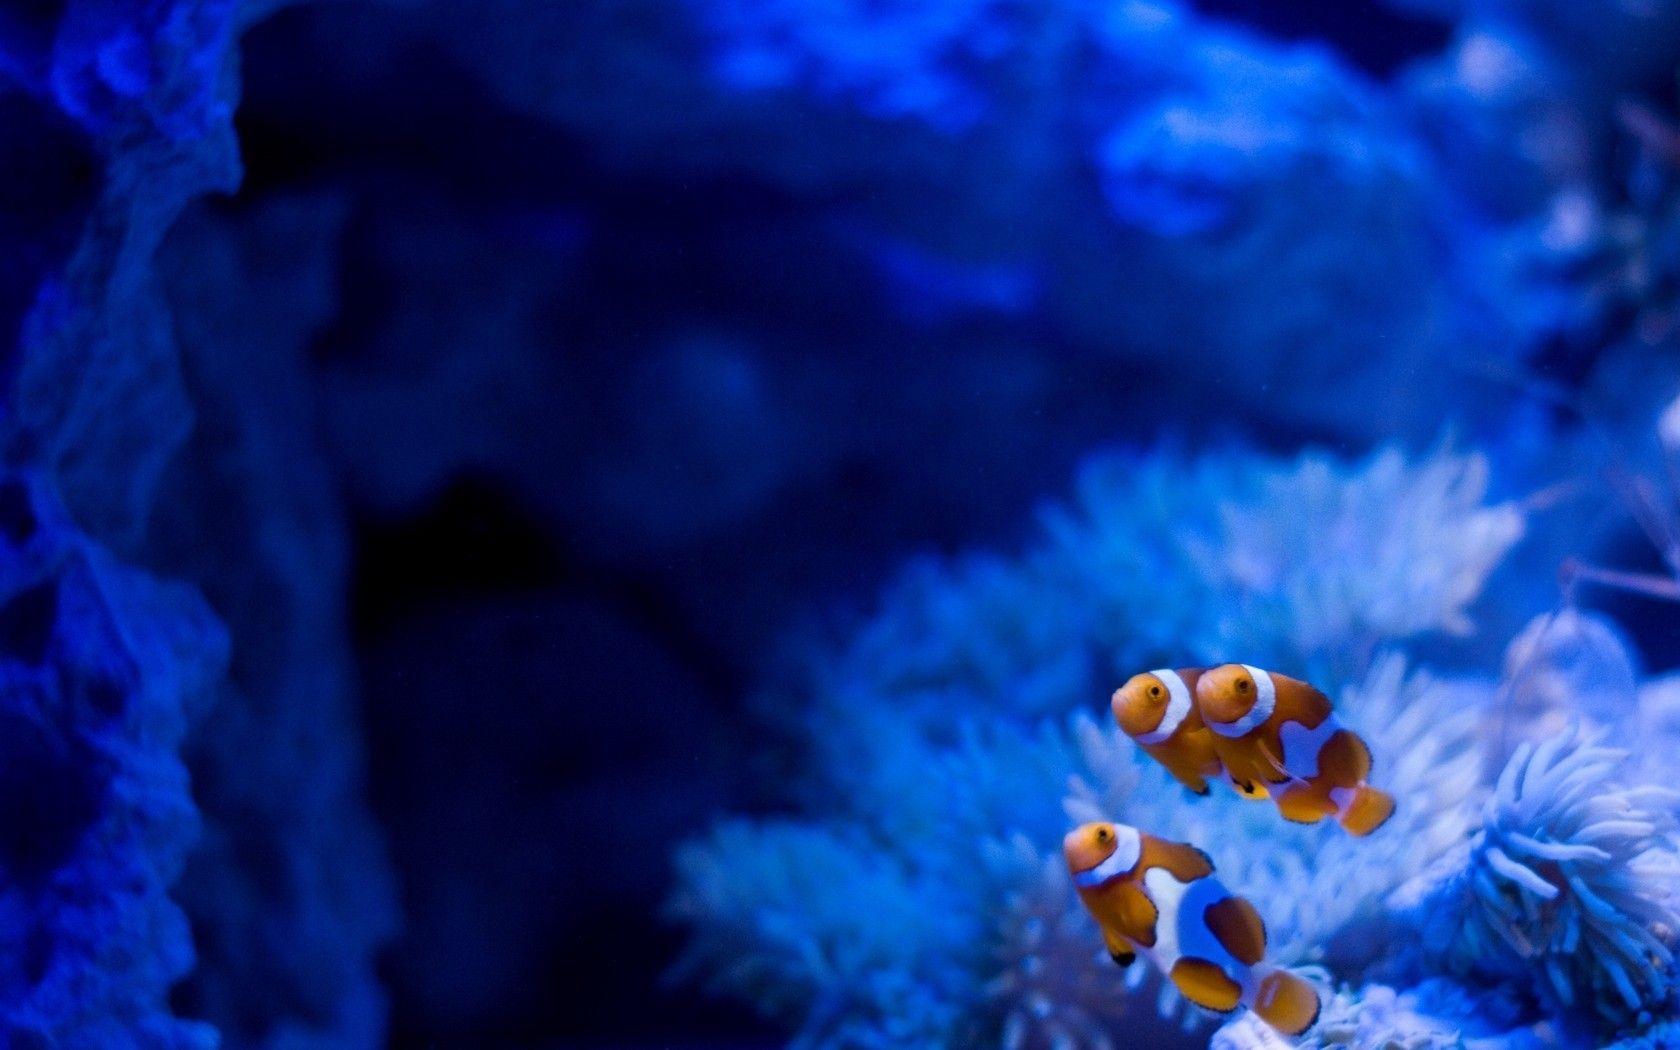 Fish on a background of blue anemone wallpaper and image